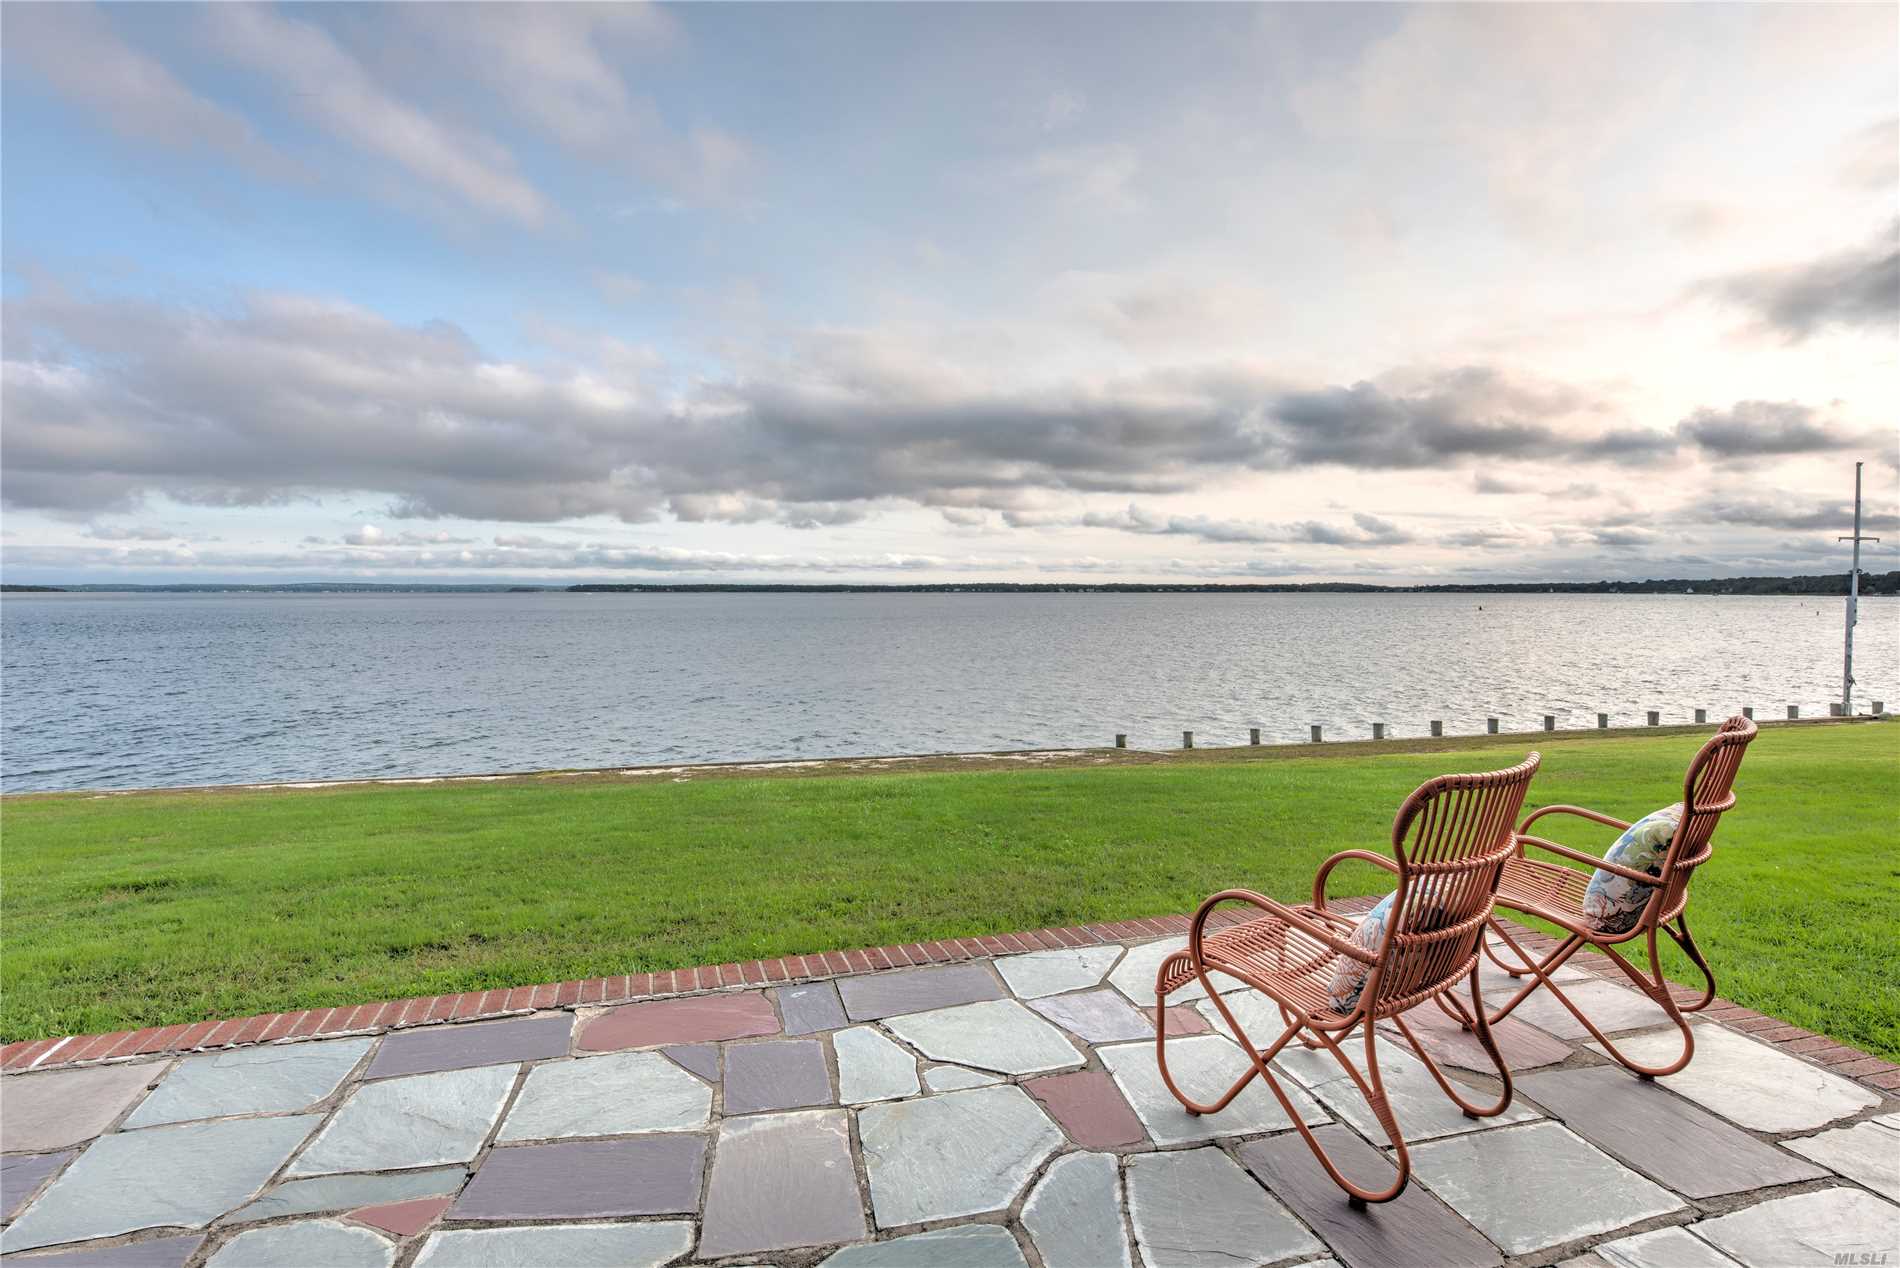 Unique Opportunity To Own A Home In Southold Directly On Peconic Bay With Waterviews To Shelter Island & Beyond. Rarely Does A Home In This &rsquo;Location&rsquo; Become Available. Bask In The Sun On Your Waterfront Patio & Watch The Boats Sail By. Wonderful Private Community Beach And Marina Just Steps Away. Close To Town, Farms, Restaurants And Wineries. Make Wonderful Memories On The North Fork.